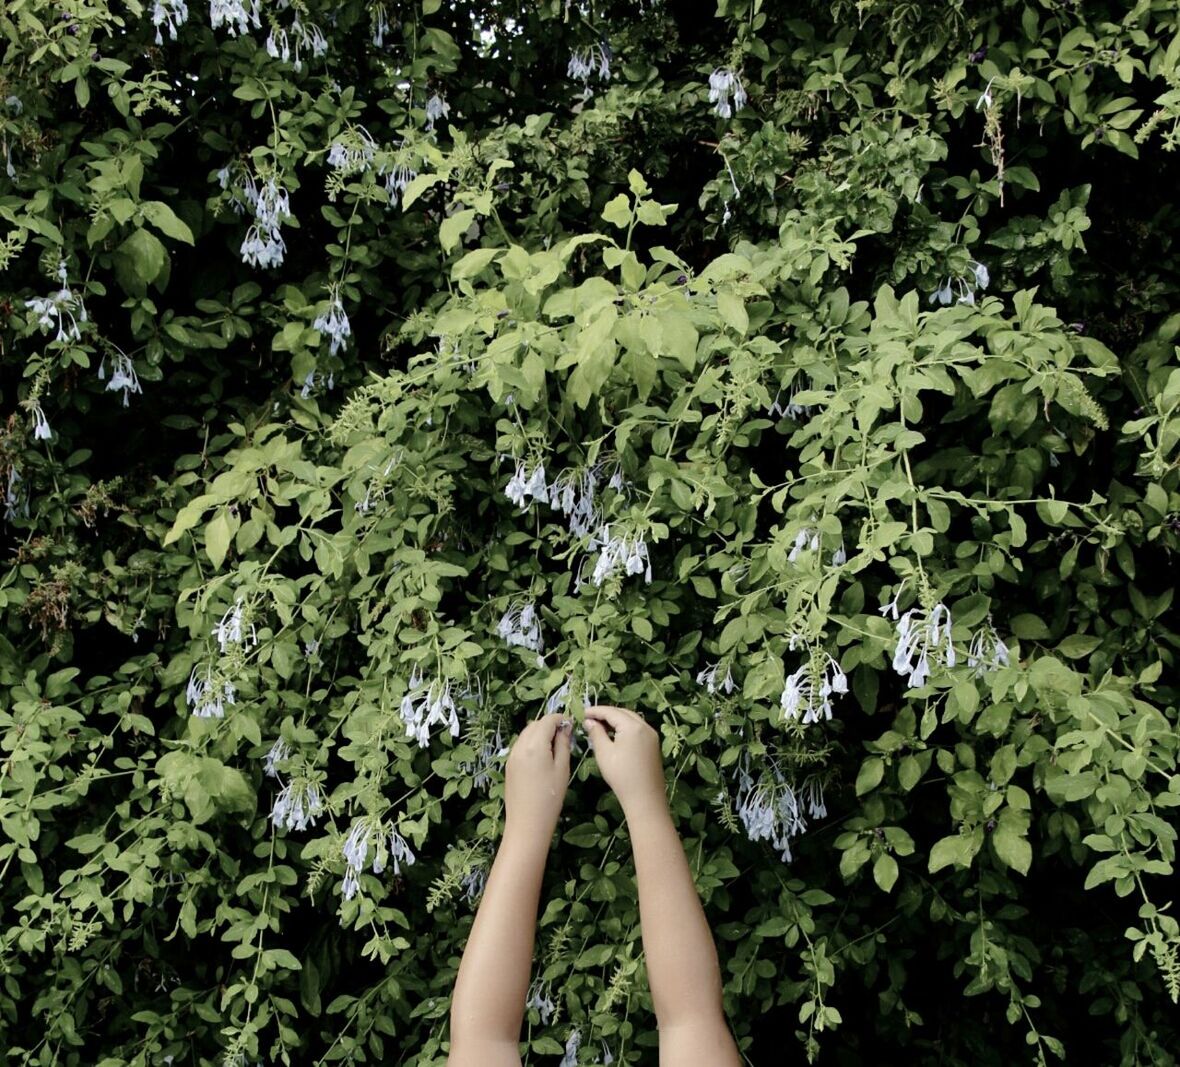 Cropped image of person hands picking flowers